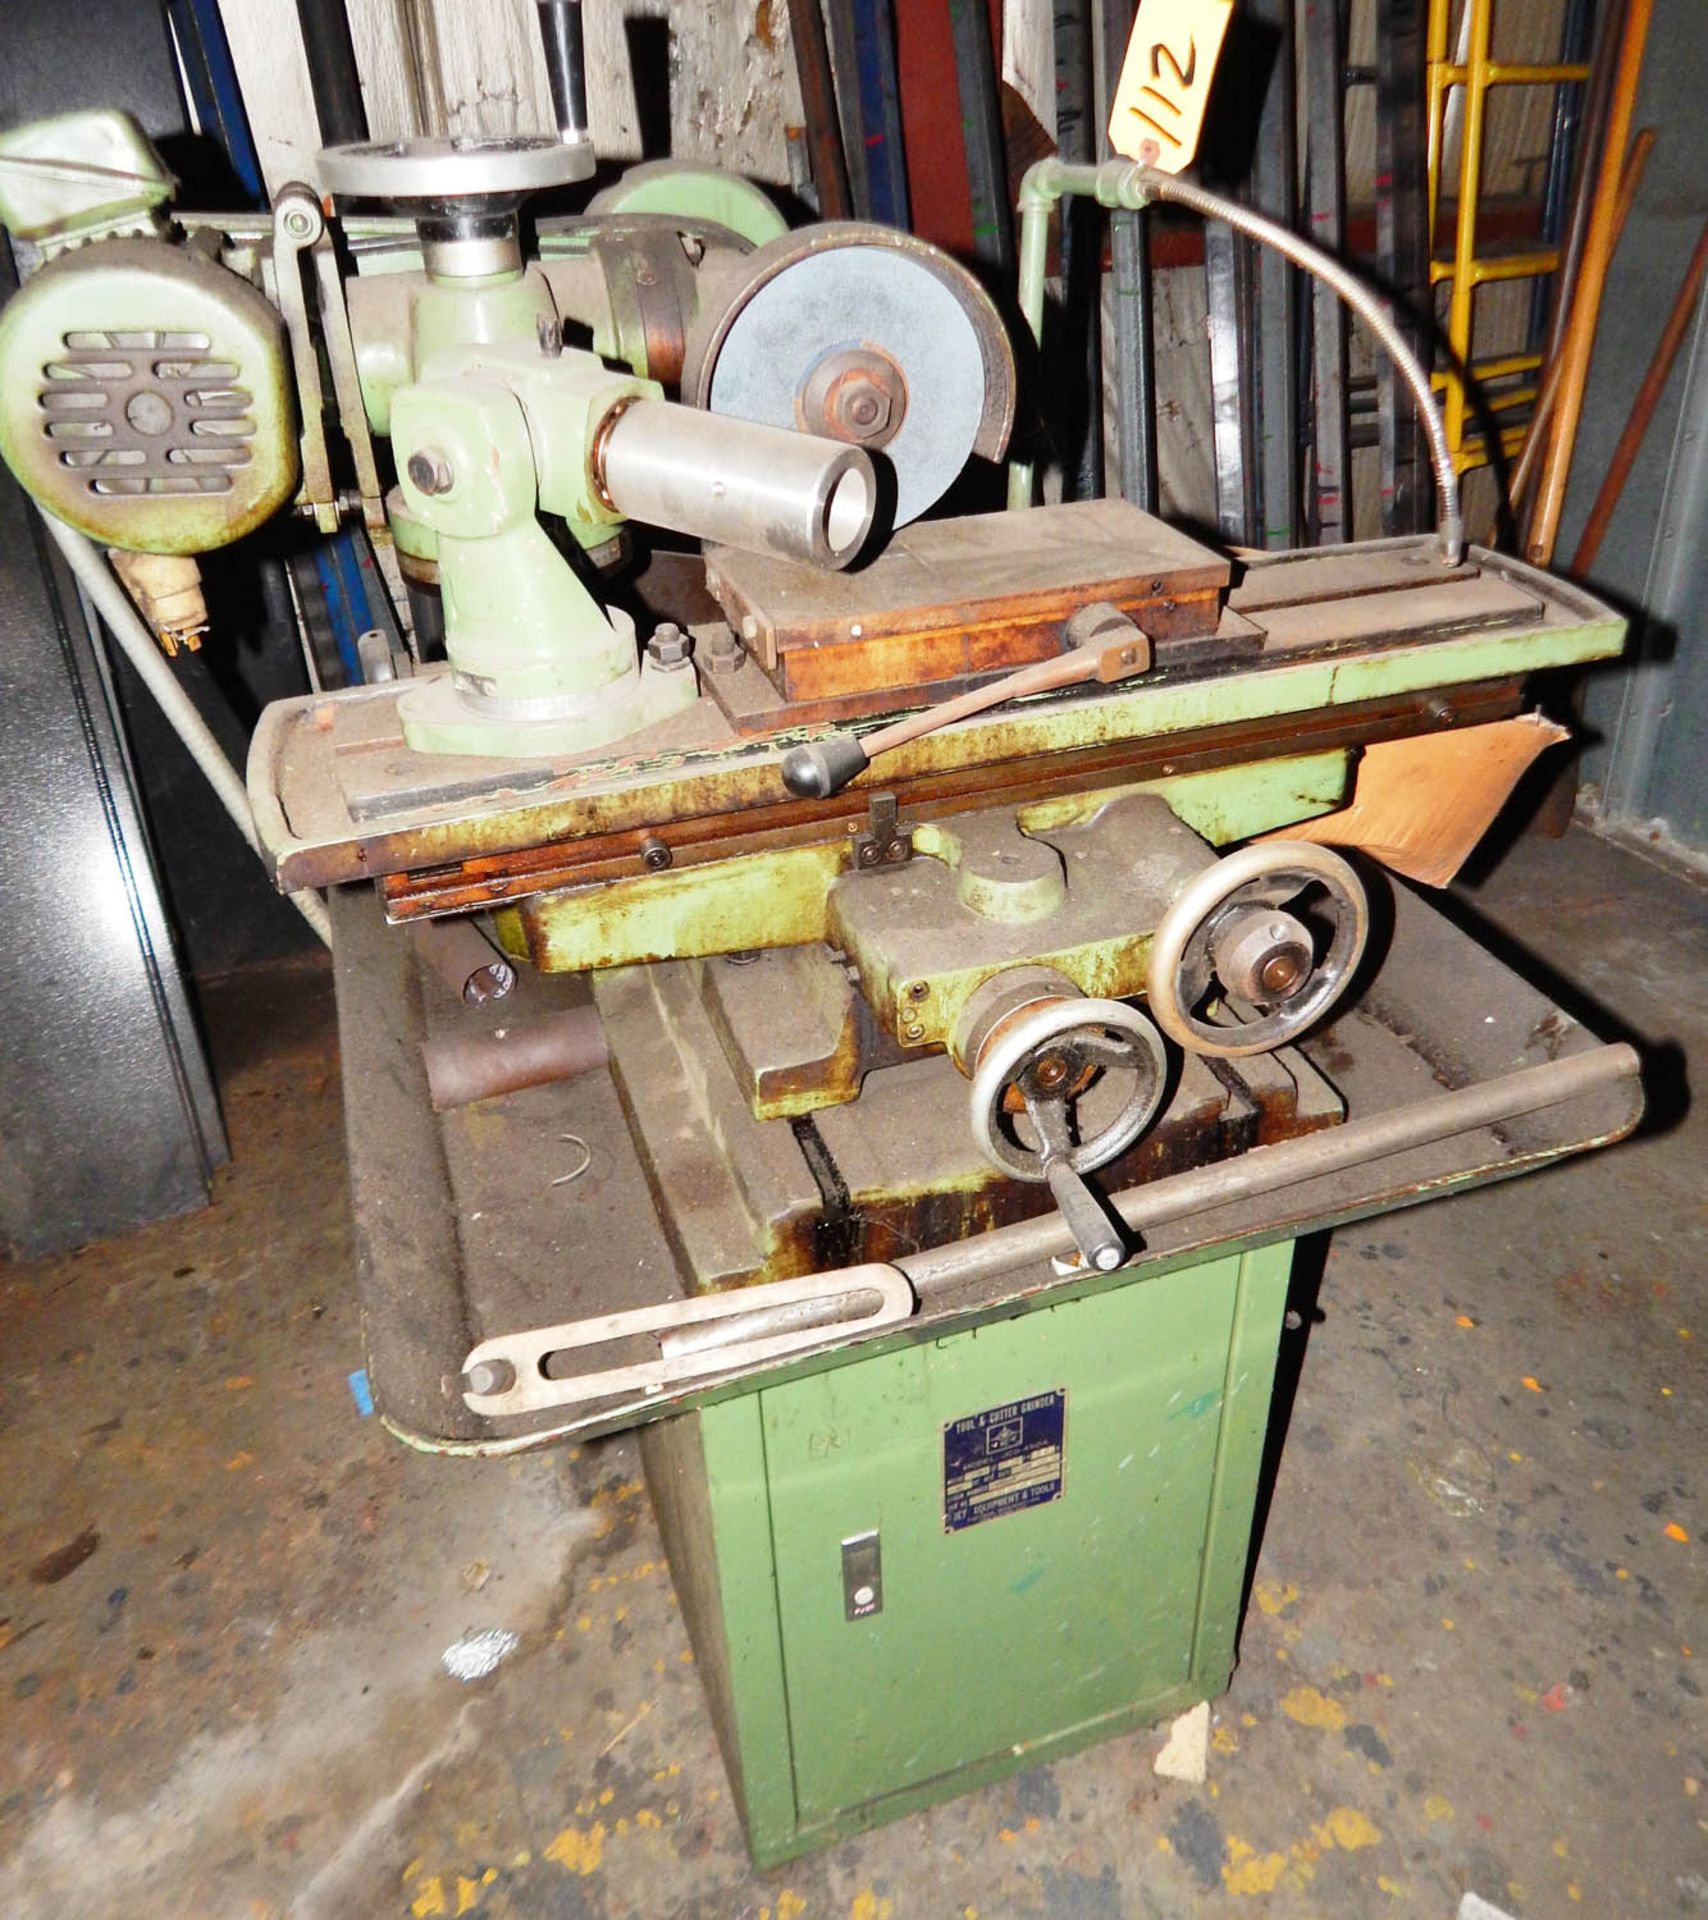 JET JCG-450A TOOL AND CUTTER GRINDER, 1/2 HP, S/N: 2834 (1985)